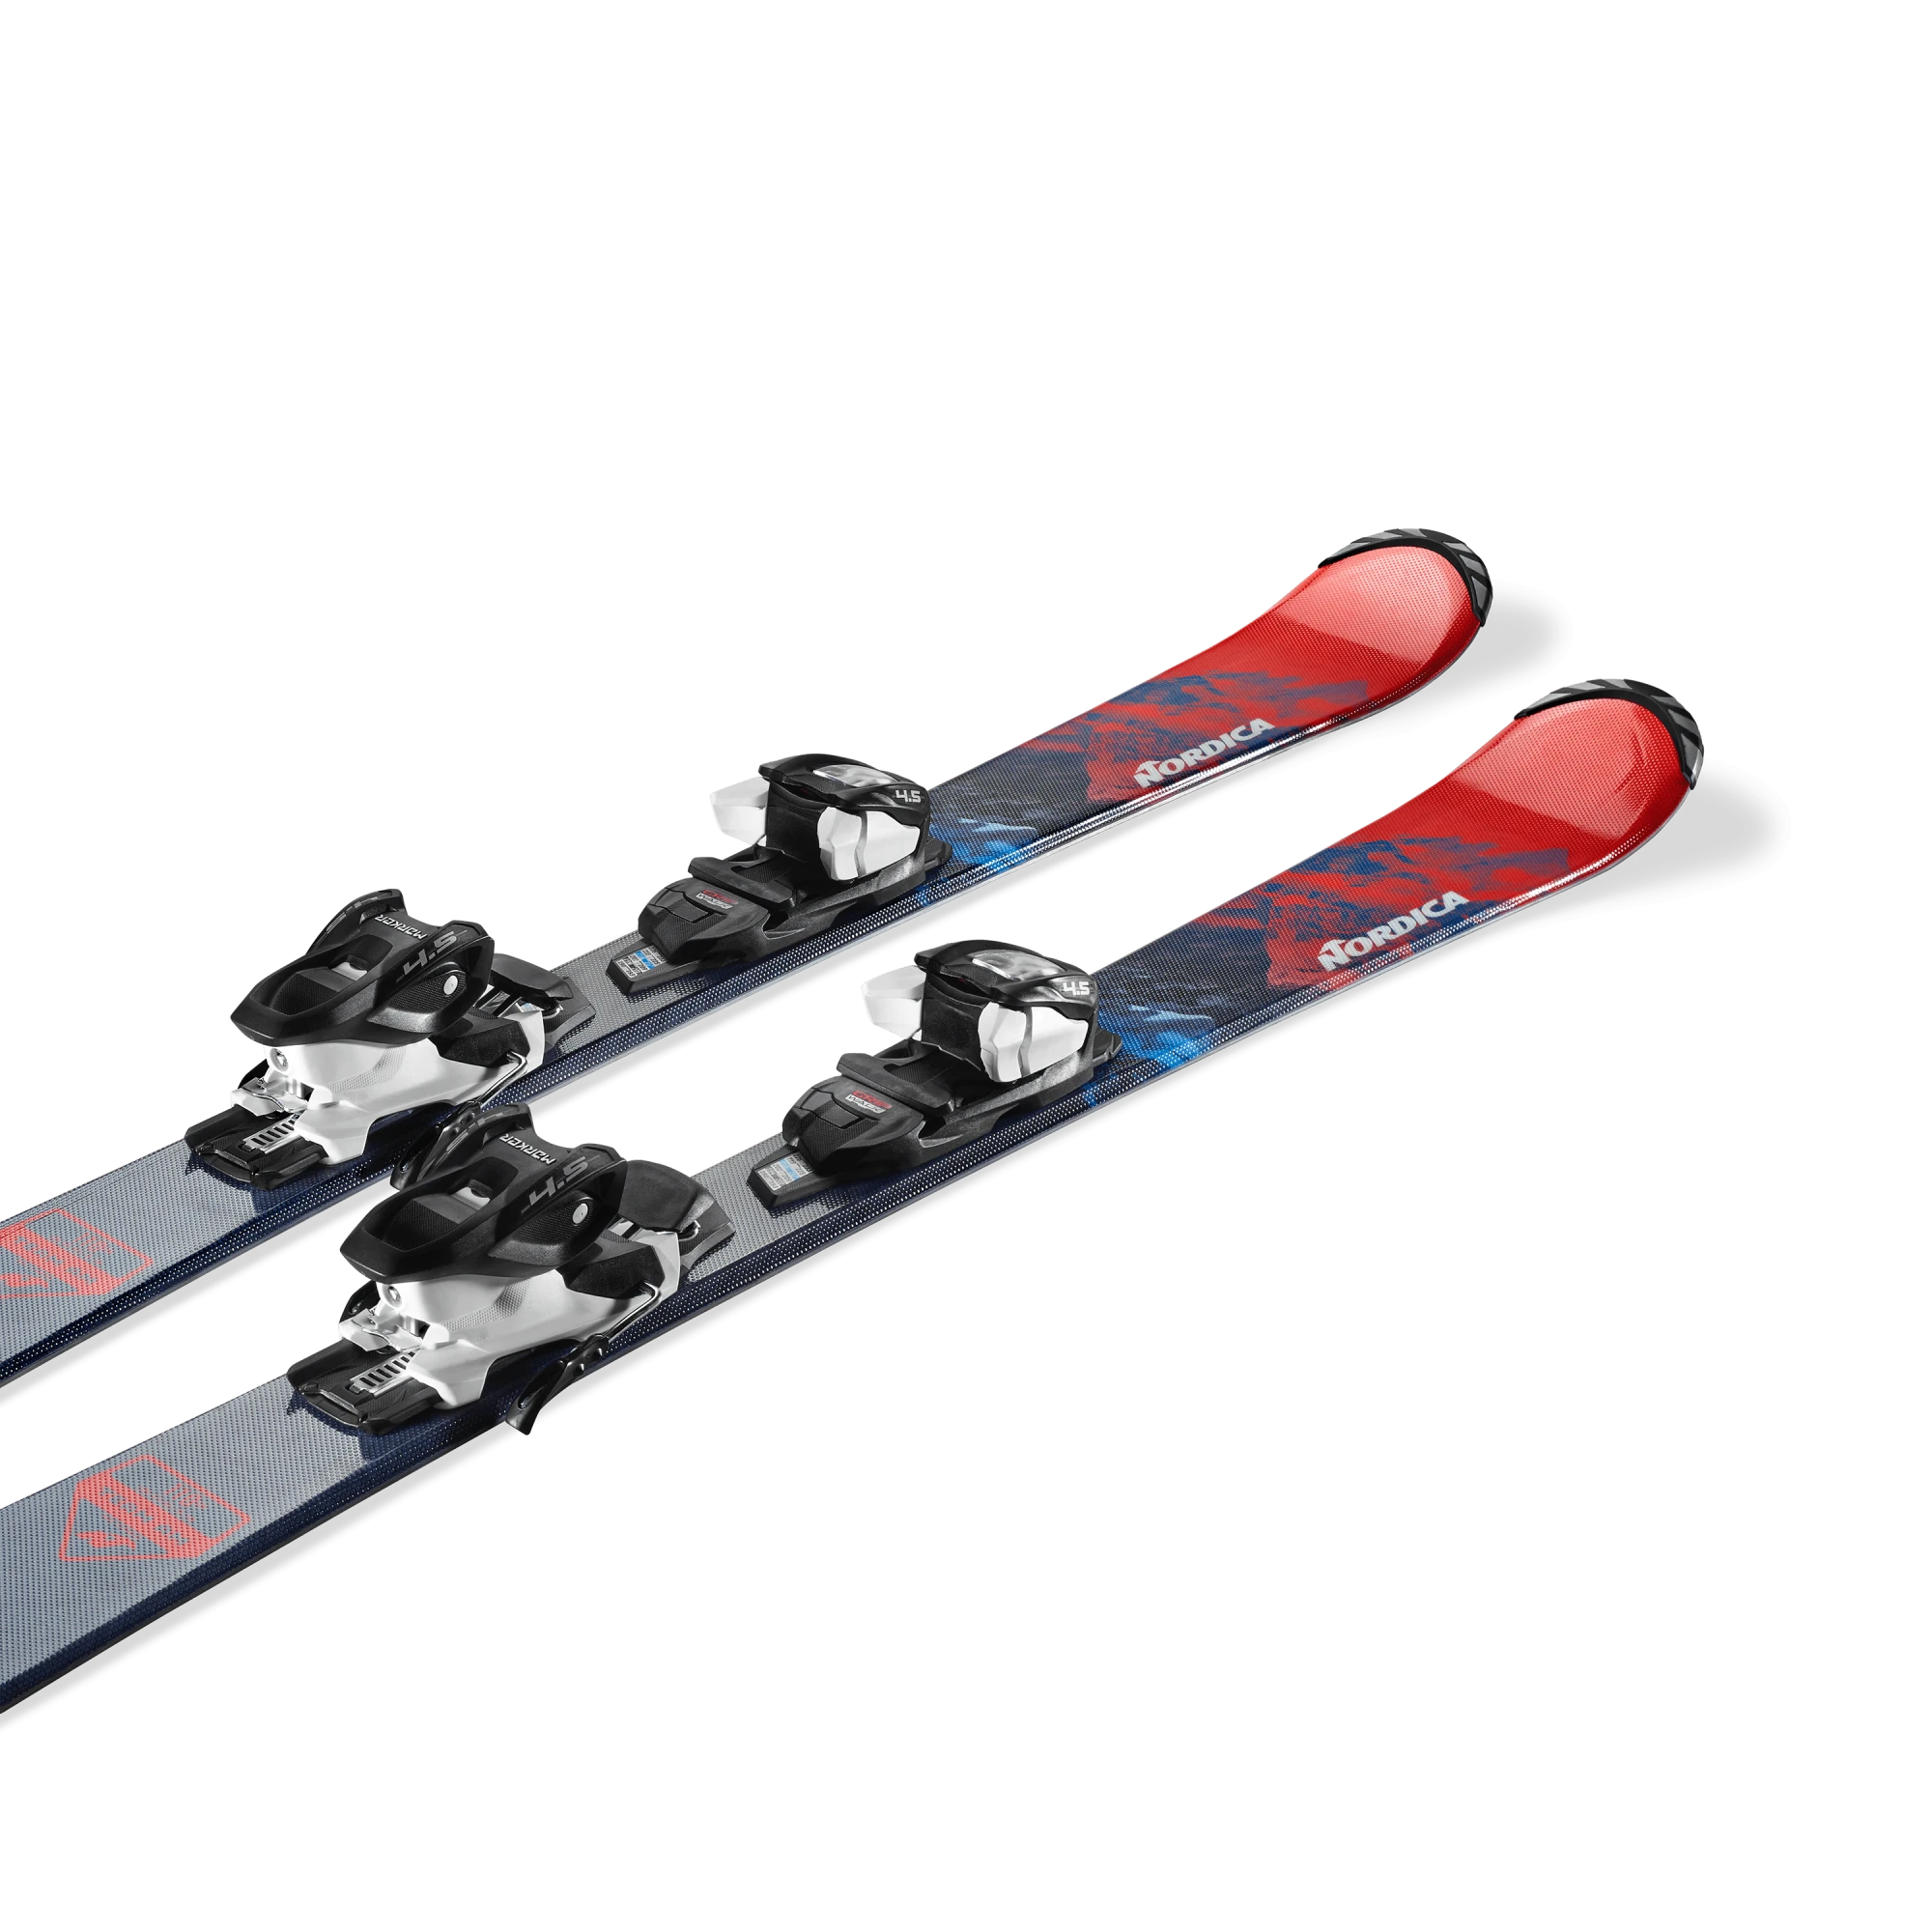 TEAM AM FDT (110-150) Nordica - Skis and Boots – Official website